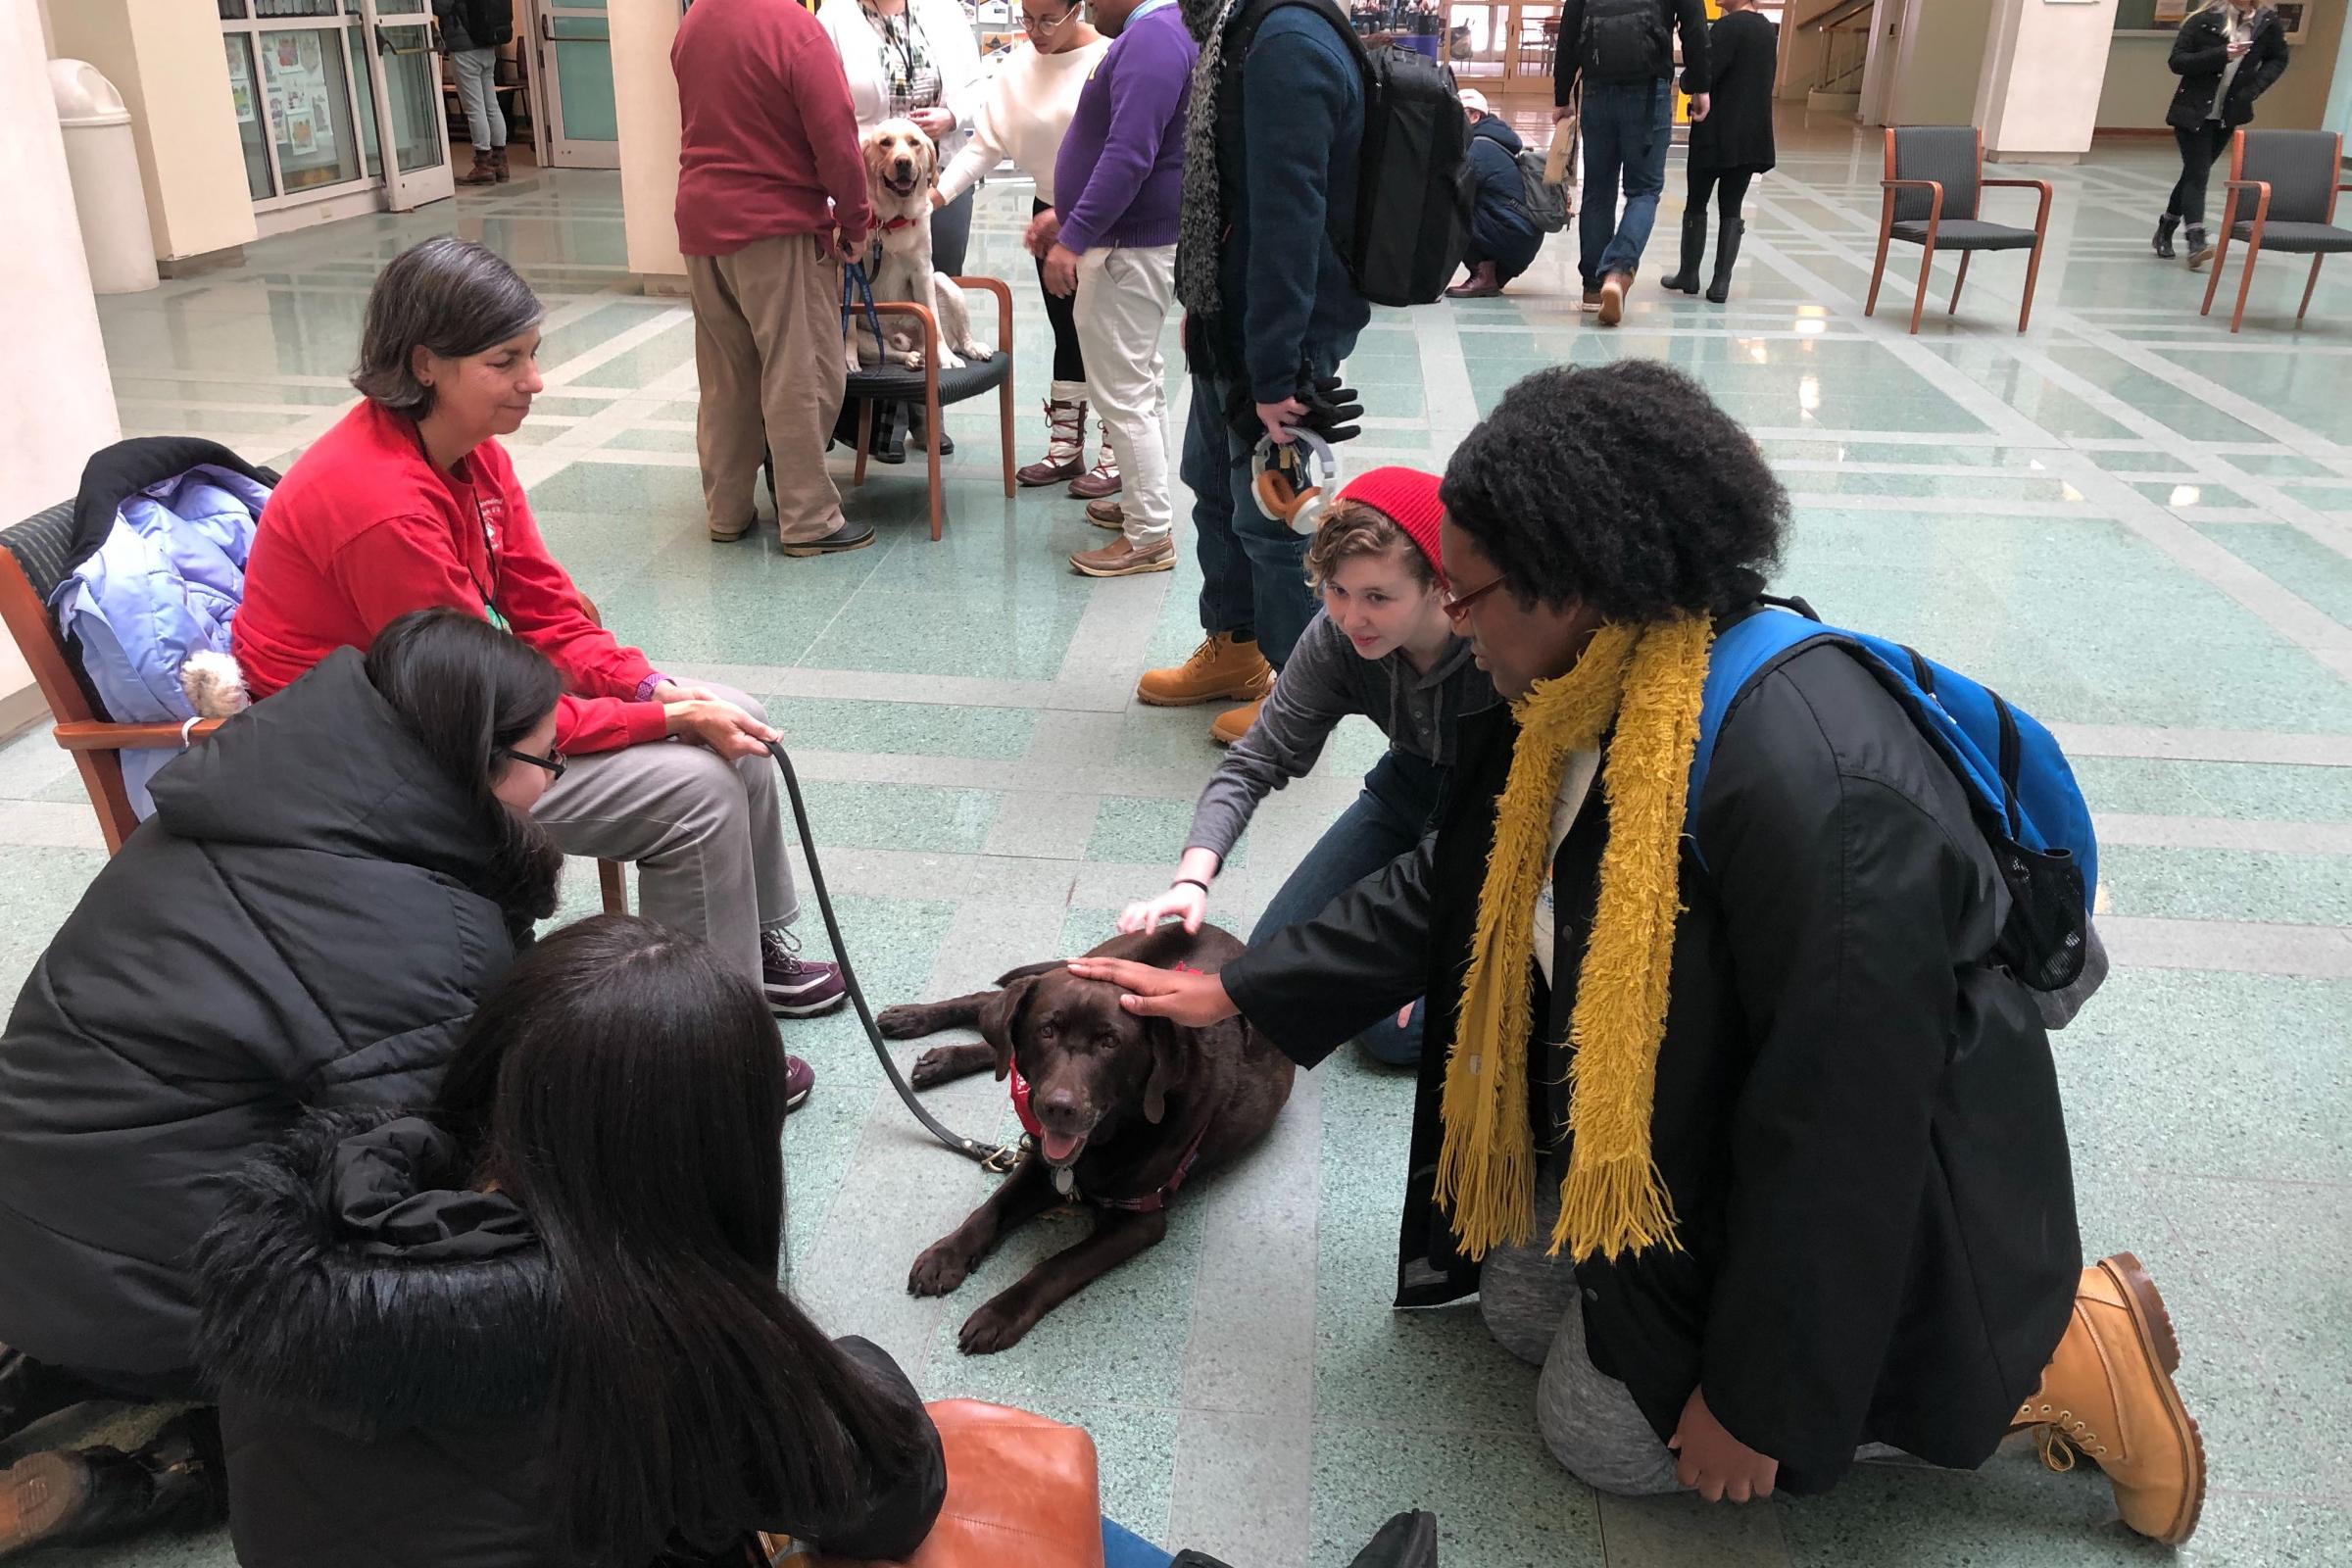 Students enjoy a visit from therapy dogs